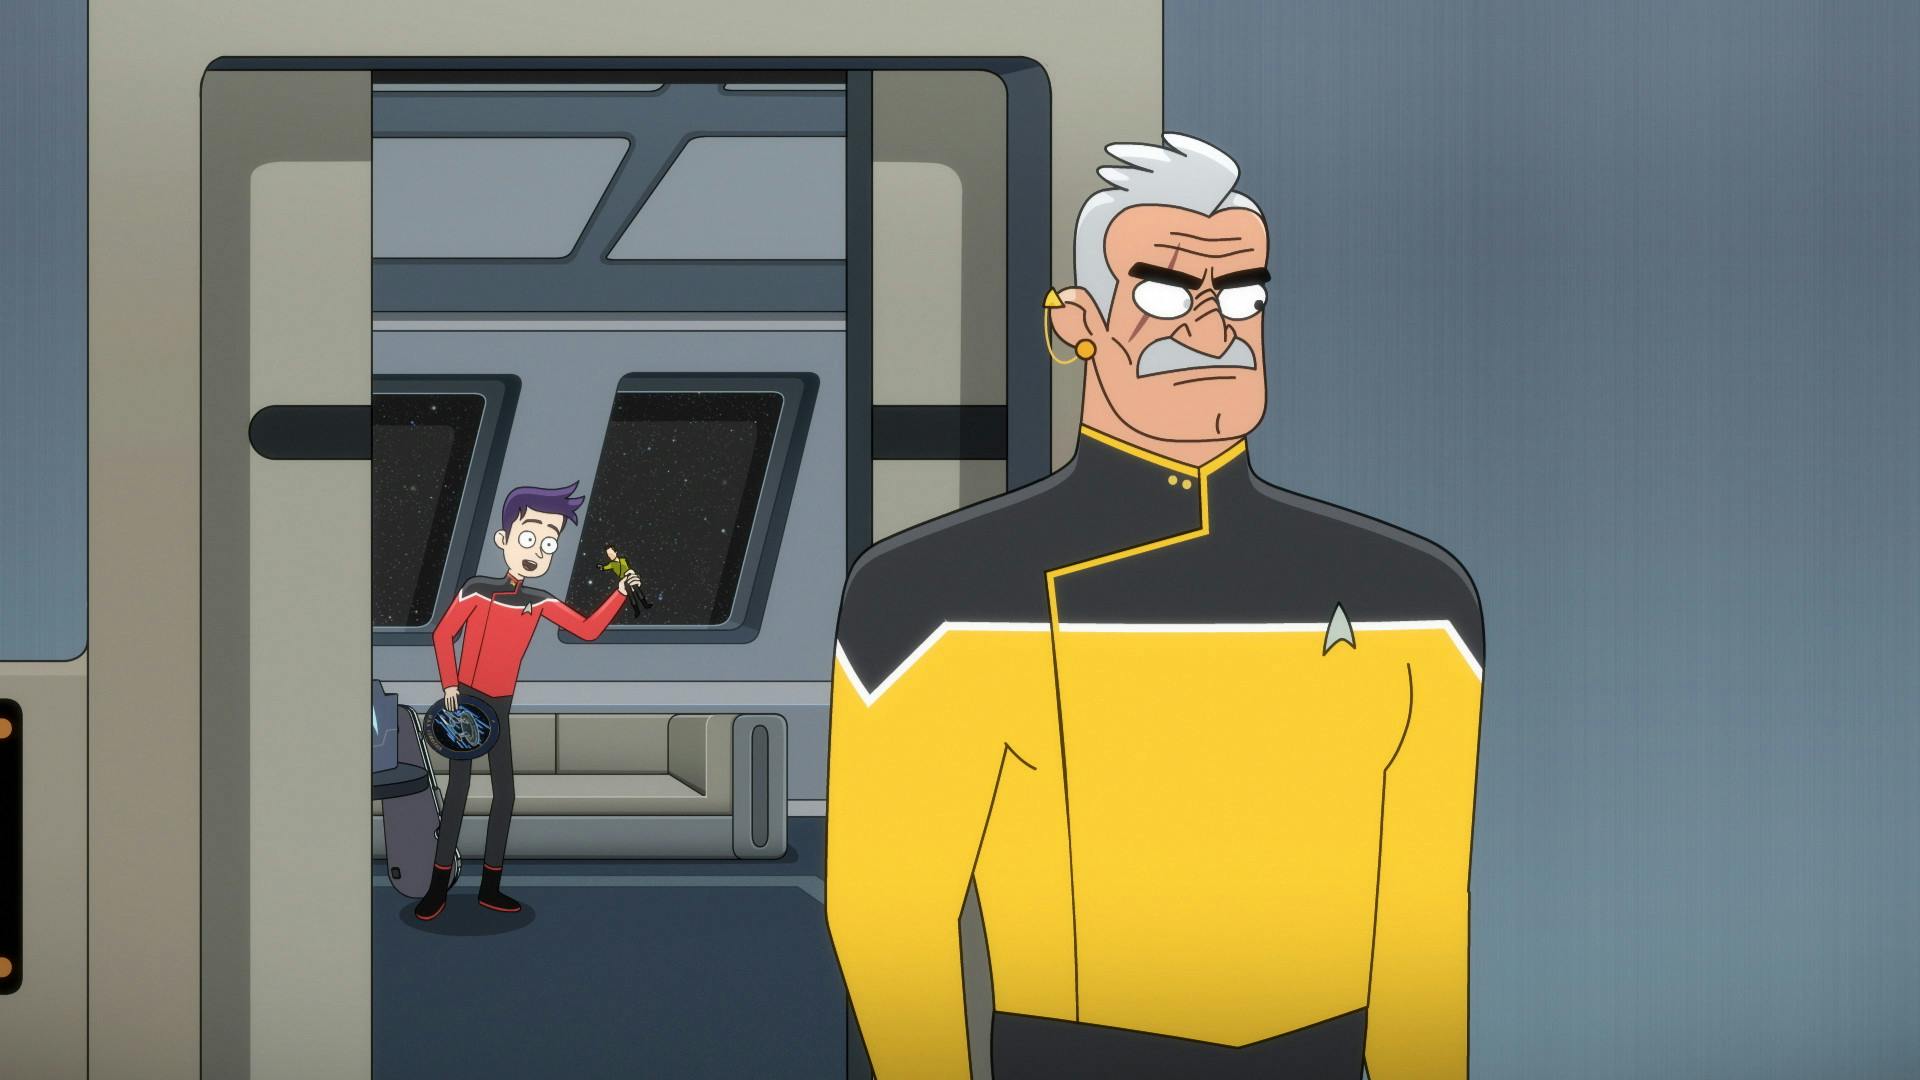 Shaxs exits Boimler's new quarters as he waves while holding his Tom Paris souvenir plate and Mirror Universe Archer action figure in 'I Have No Bones Yet I Must Flee'